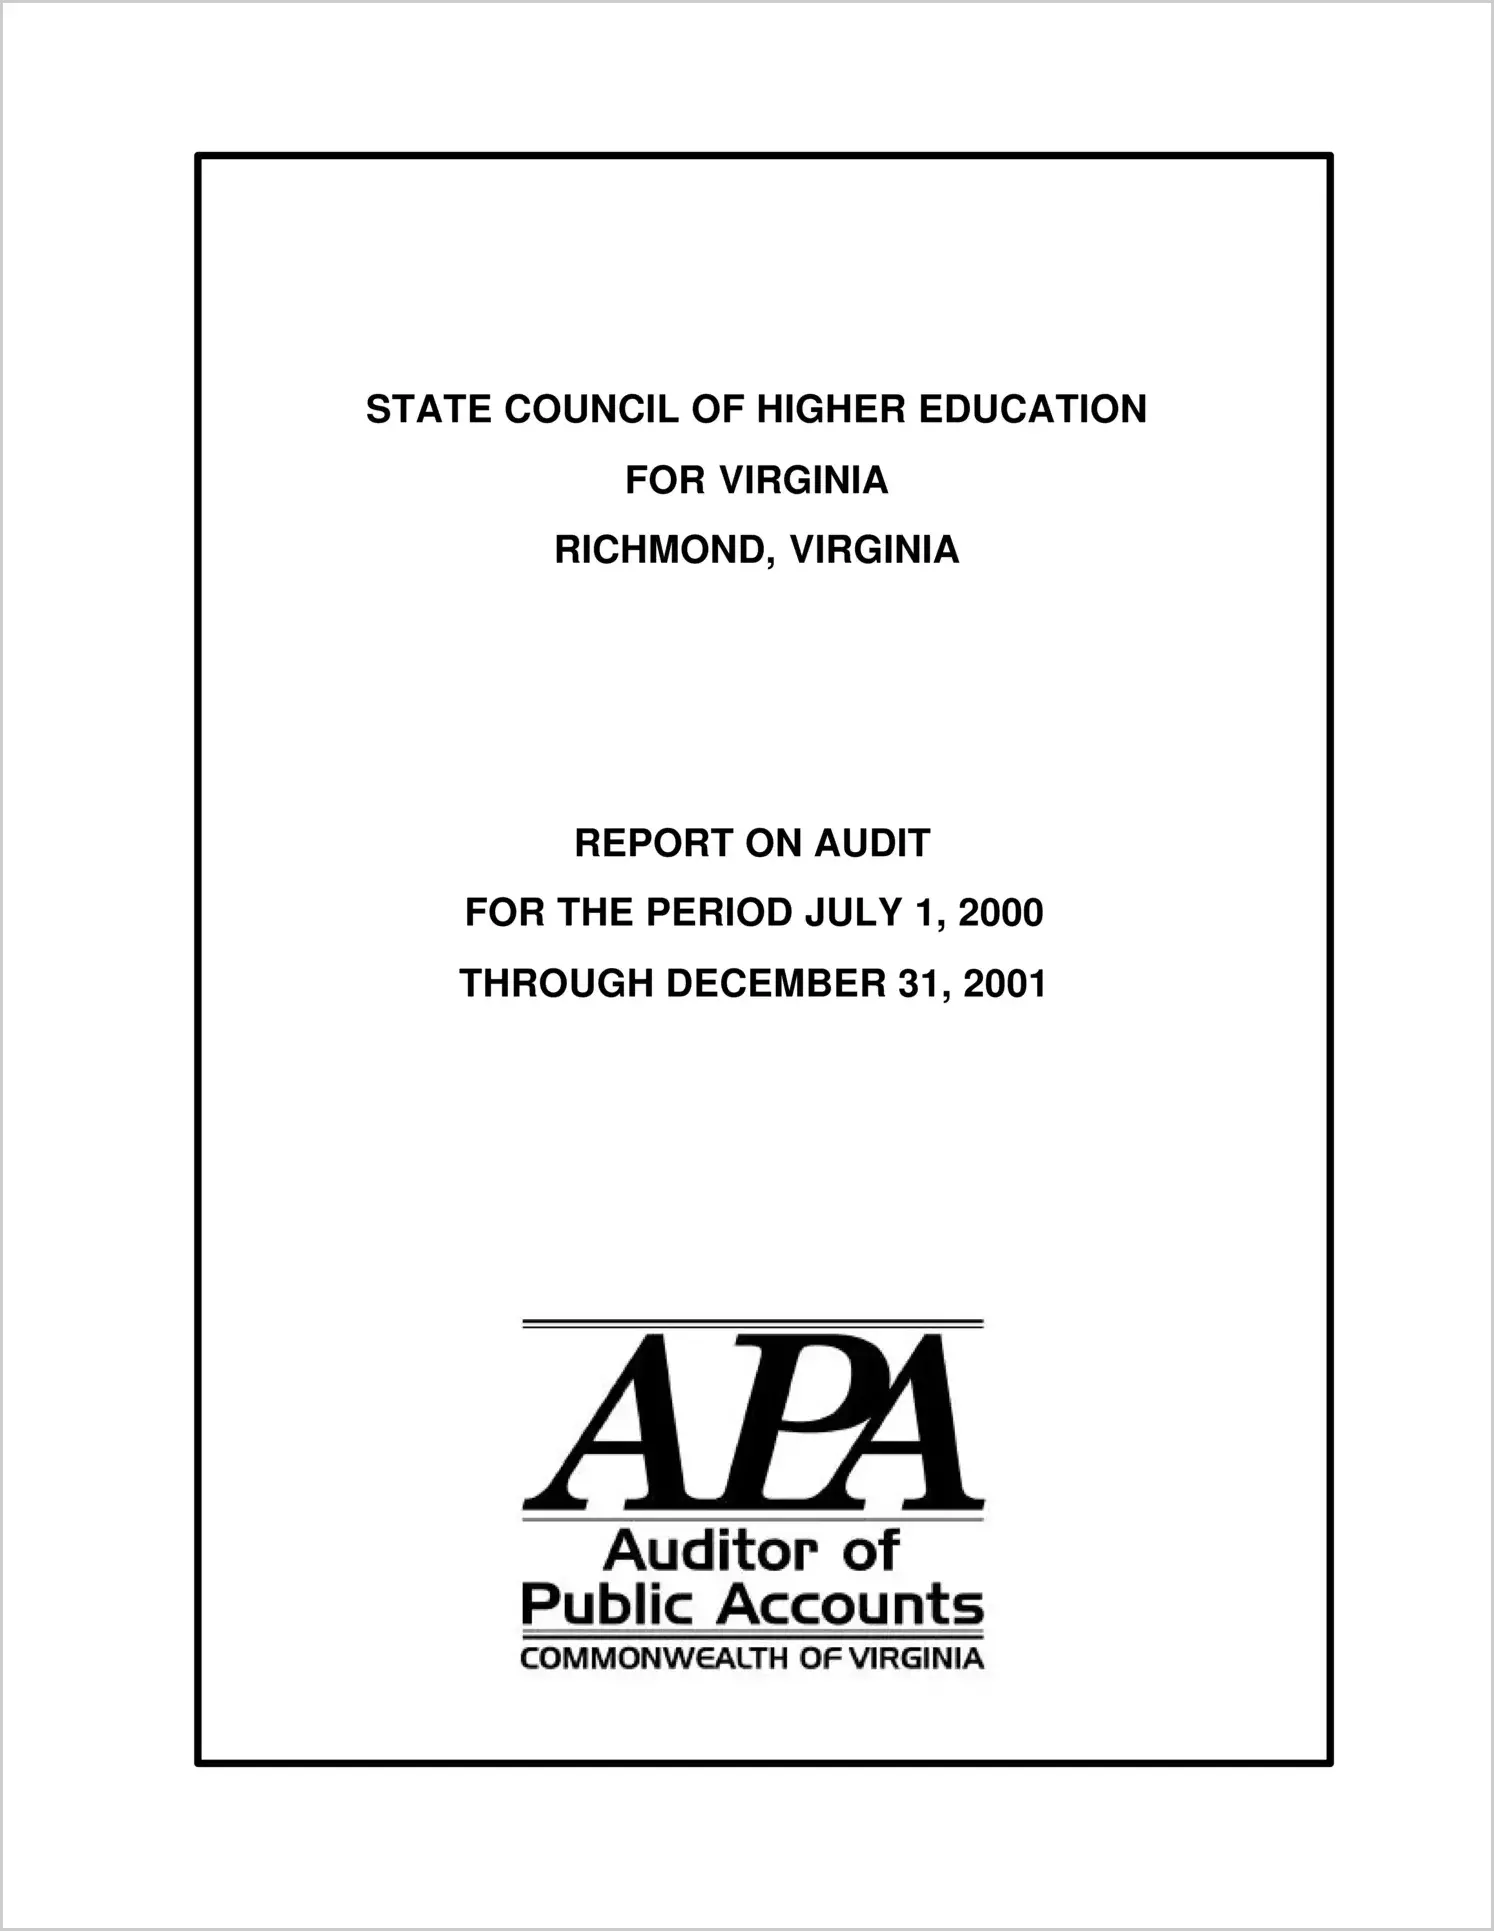 State Council of Higher Education for Virginia for the period July 1, 2000 through December 31, 2001